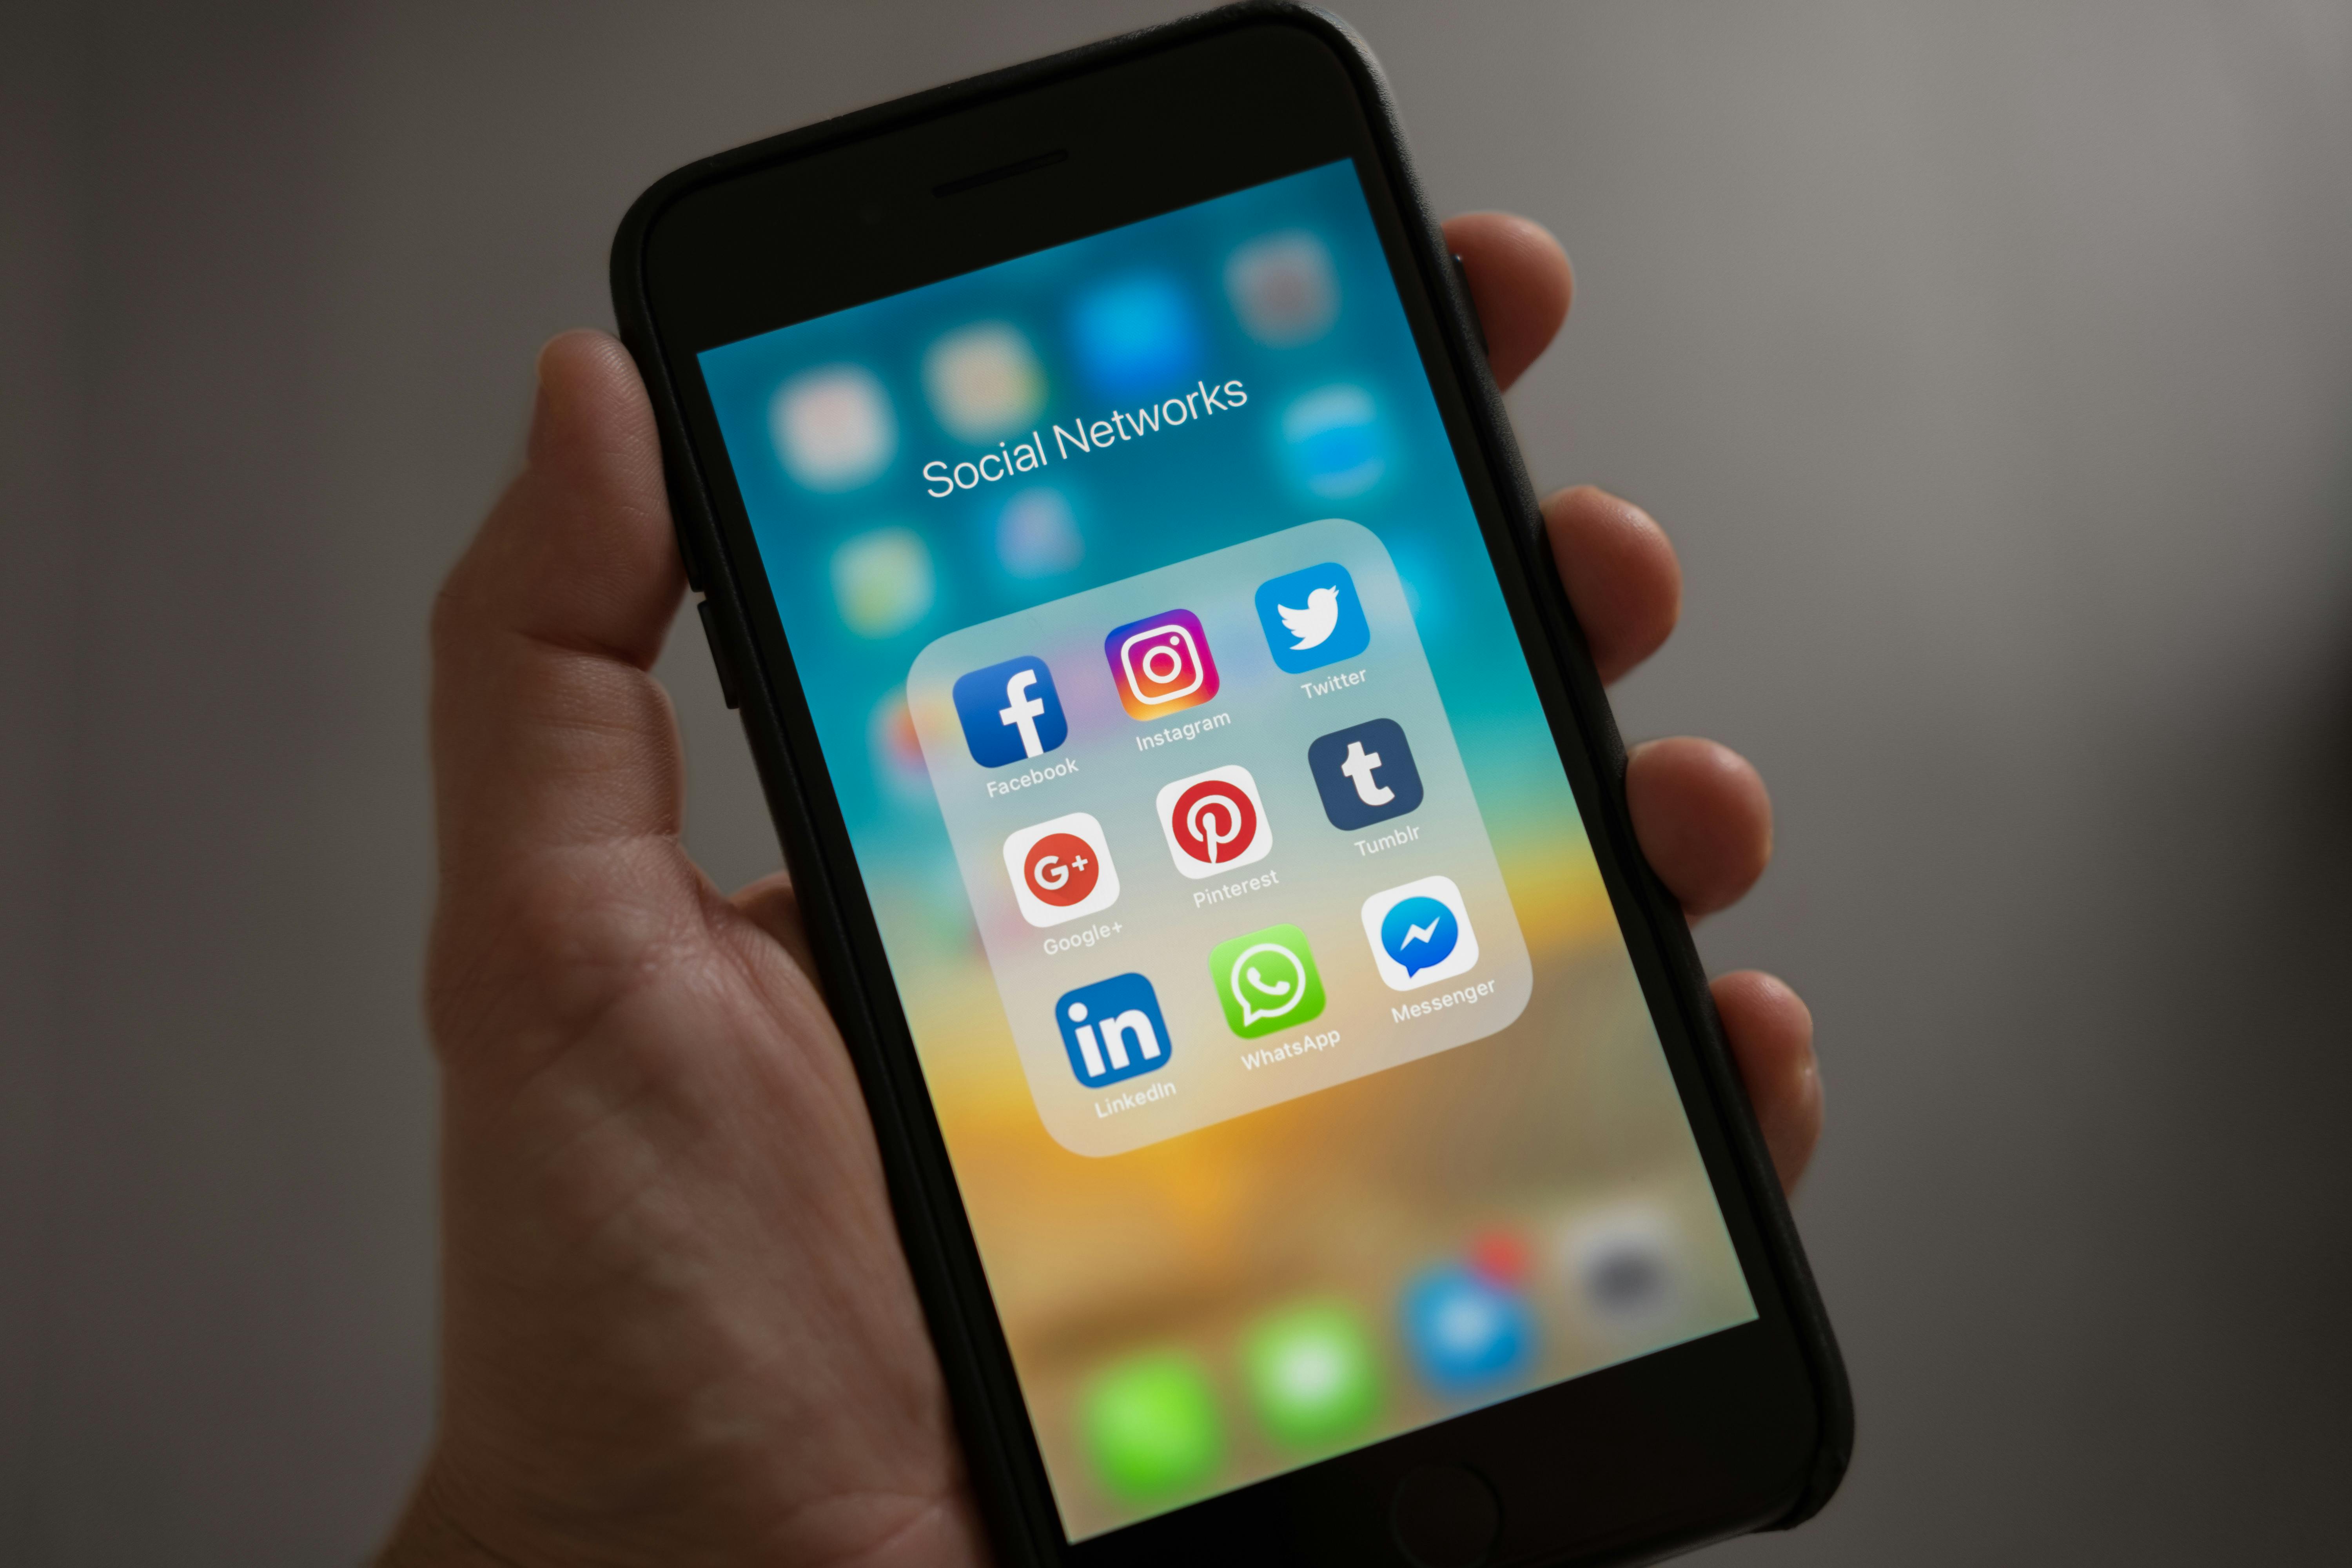 A photo of a phone with social media apps on display | Source: Pexels